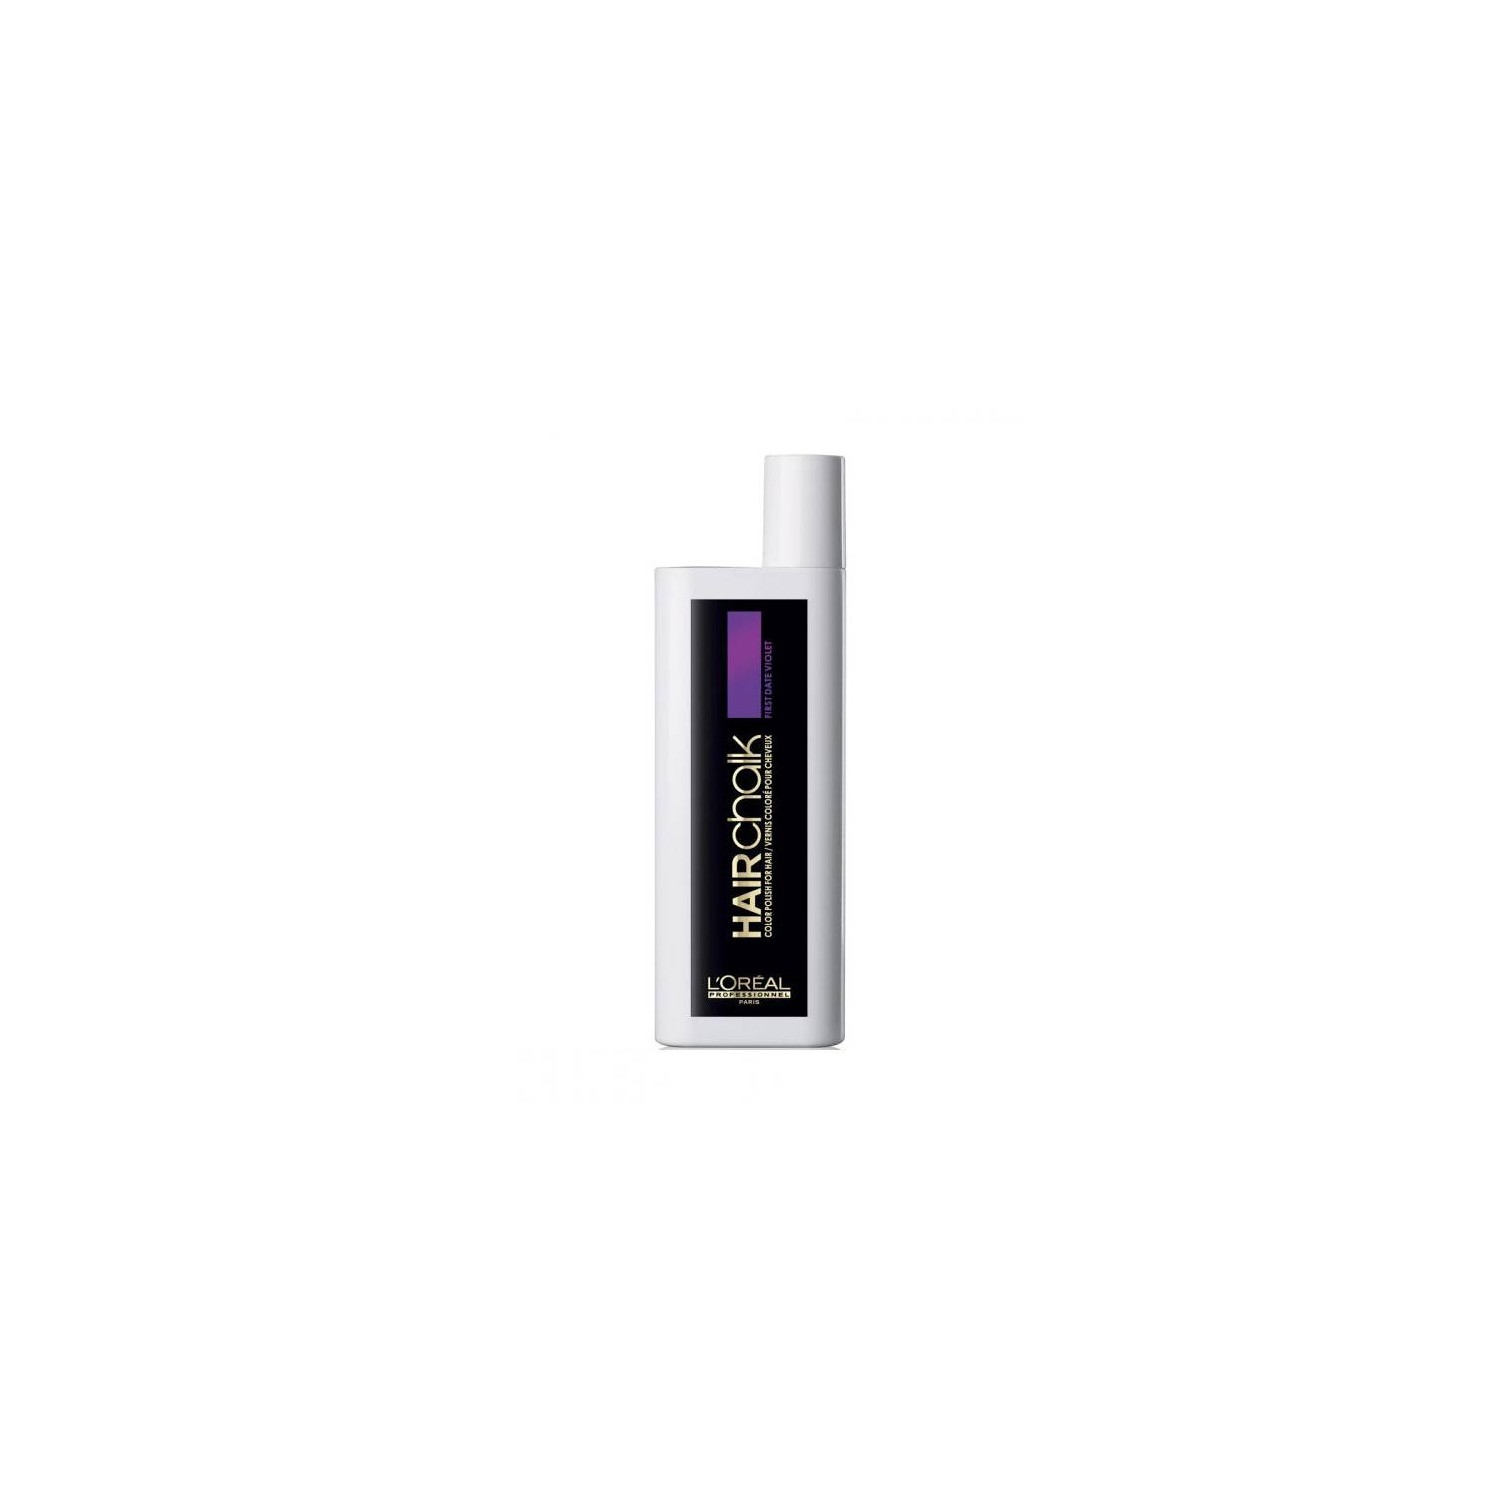 Loreal Hair Chalk First Date Violette 50 ml